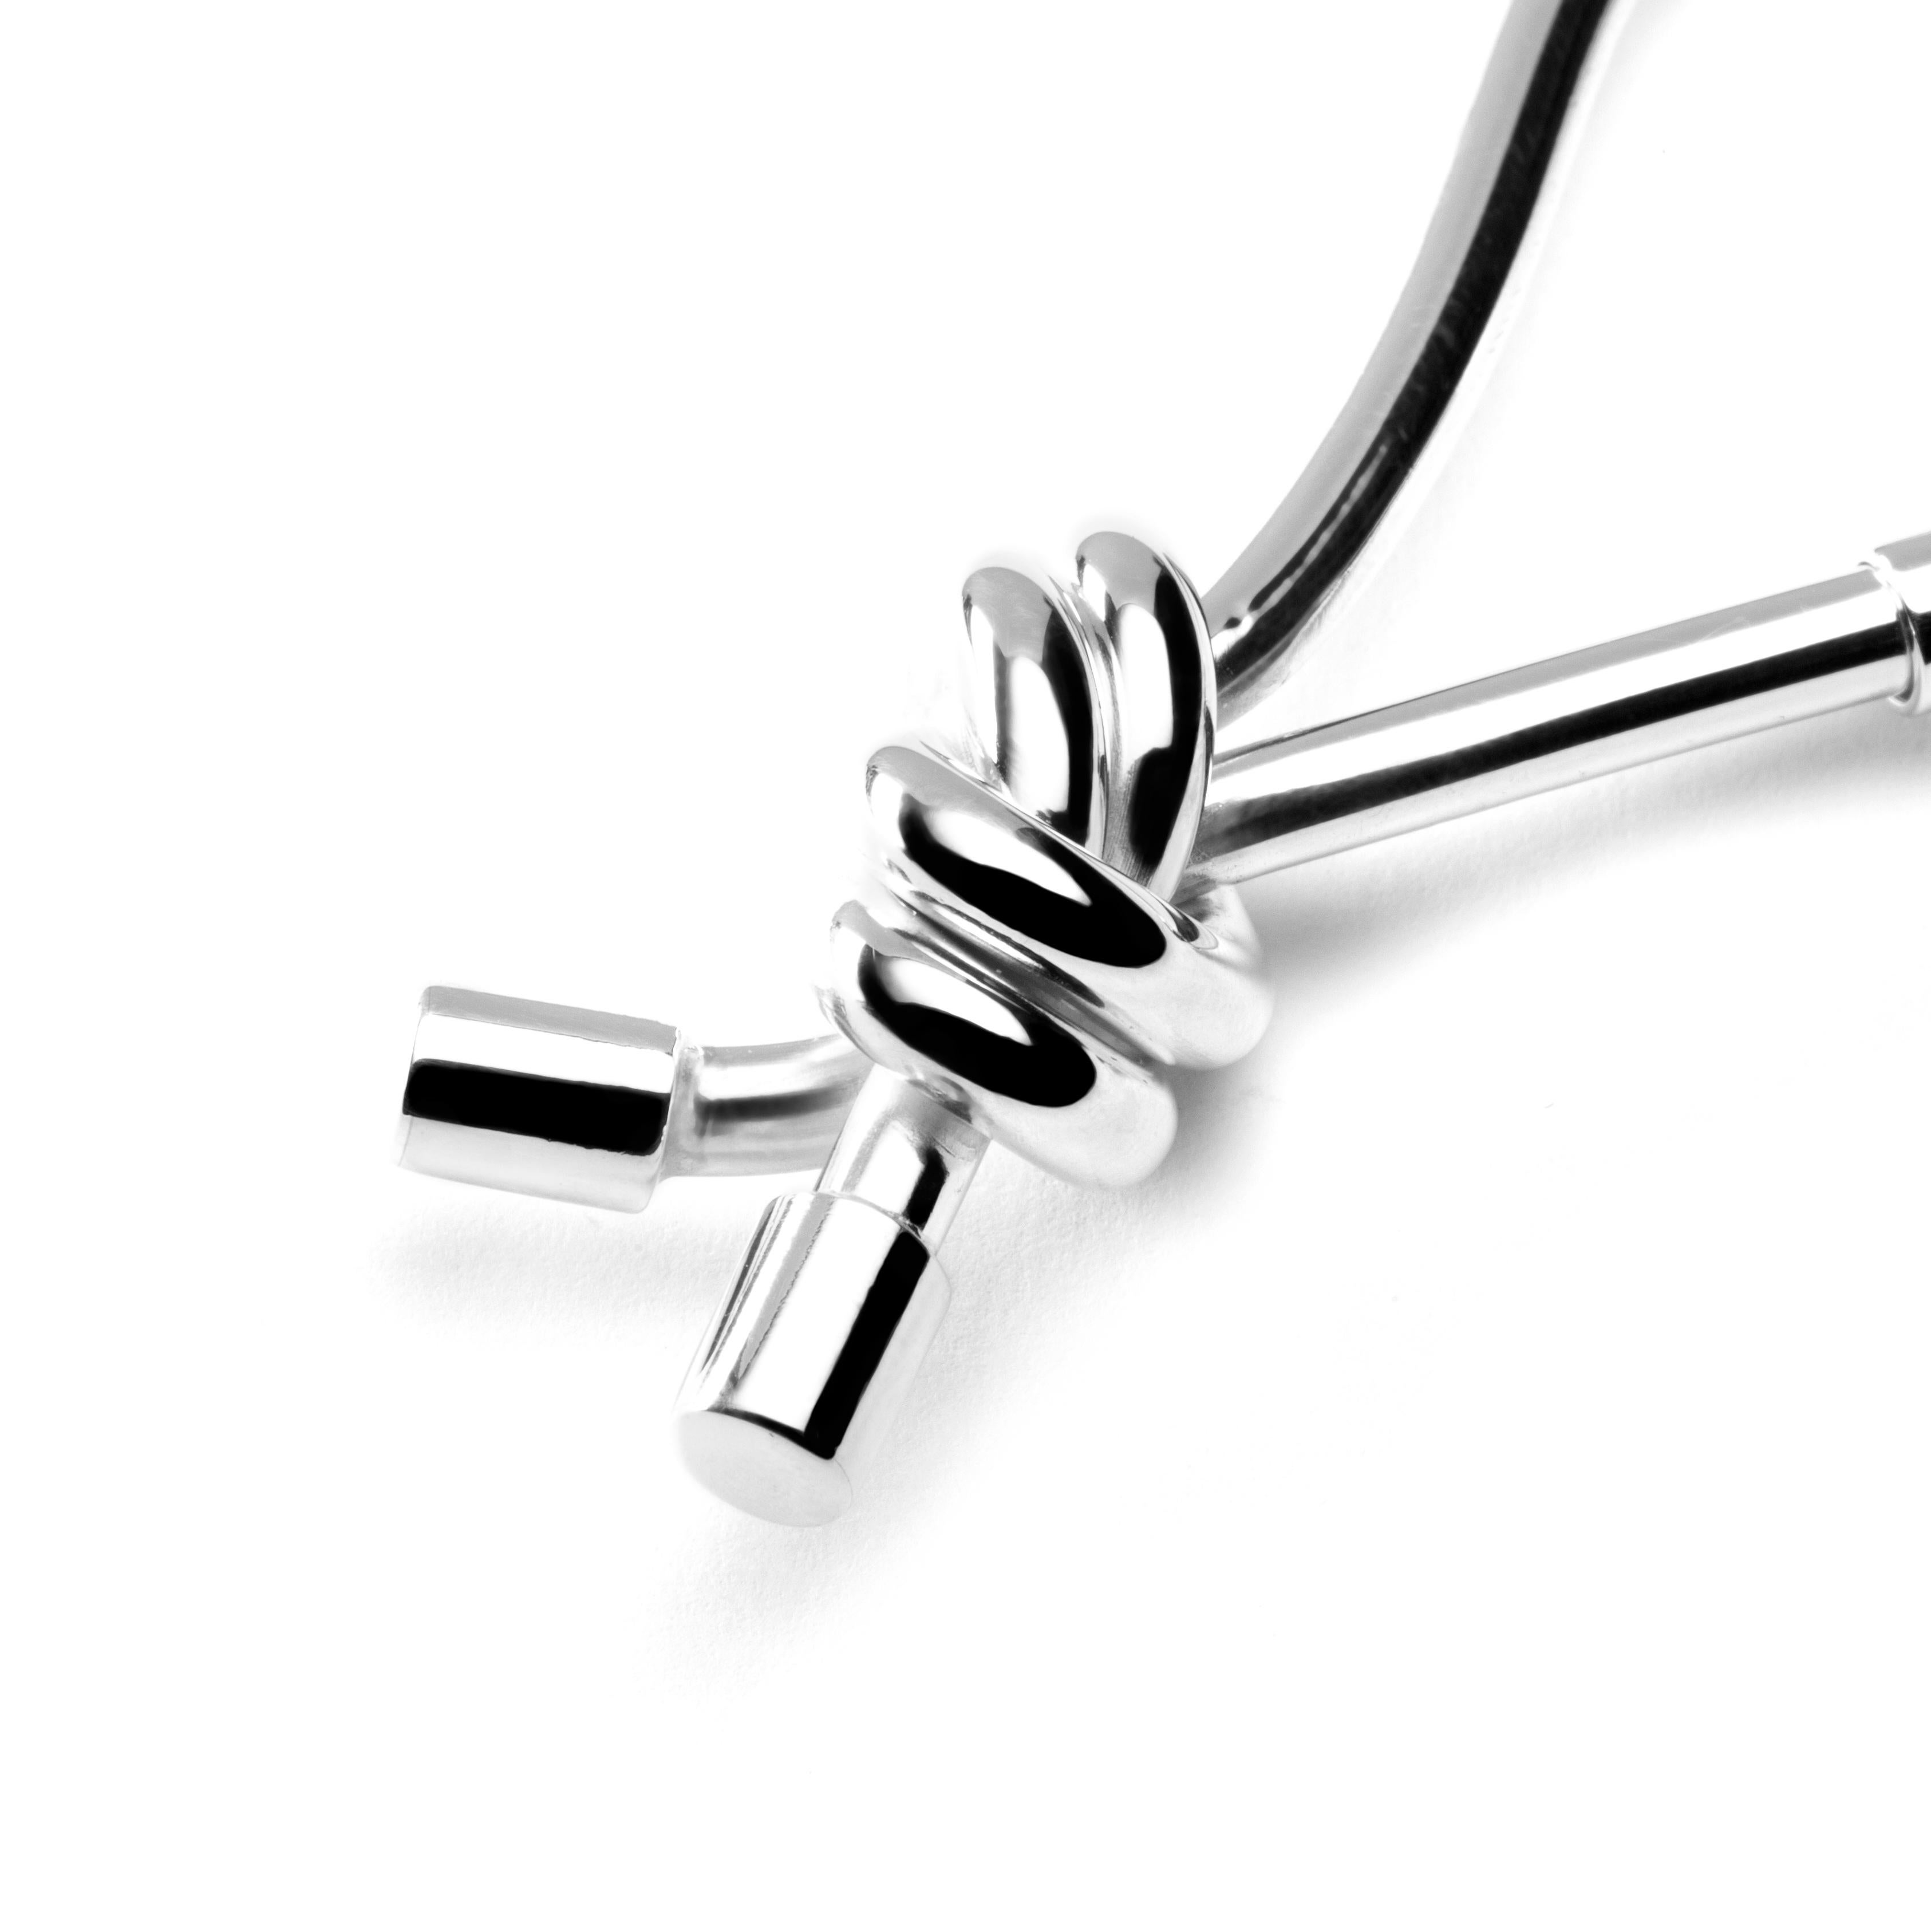 Alex Jona design collection, hand crafted in Italy, Sterling Silver key holder.
Dimensions : L 2.84 in/ 72.36 mm x W 1.18 in/ 30.15 mm x Depth: 0.61 in/ 15.58 mm

Alex Jona gifts stand out, not only for their special design and for the excellent